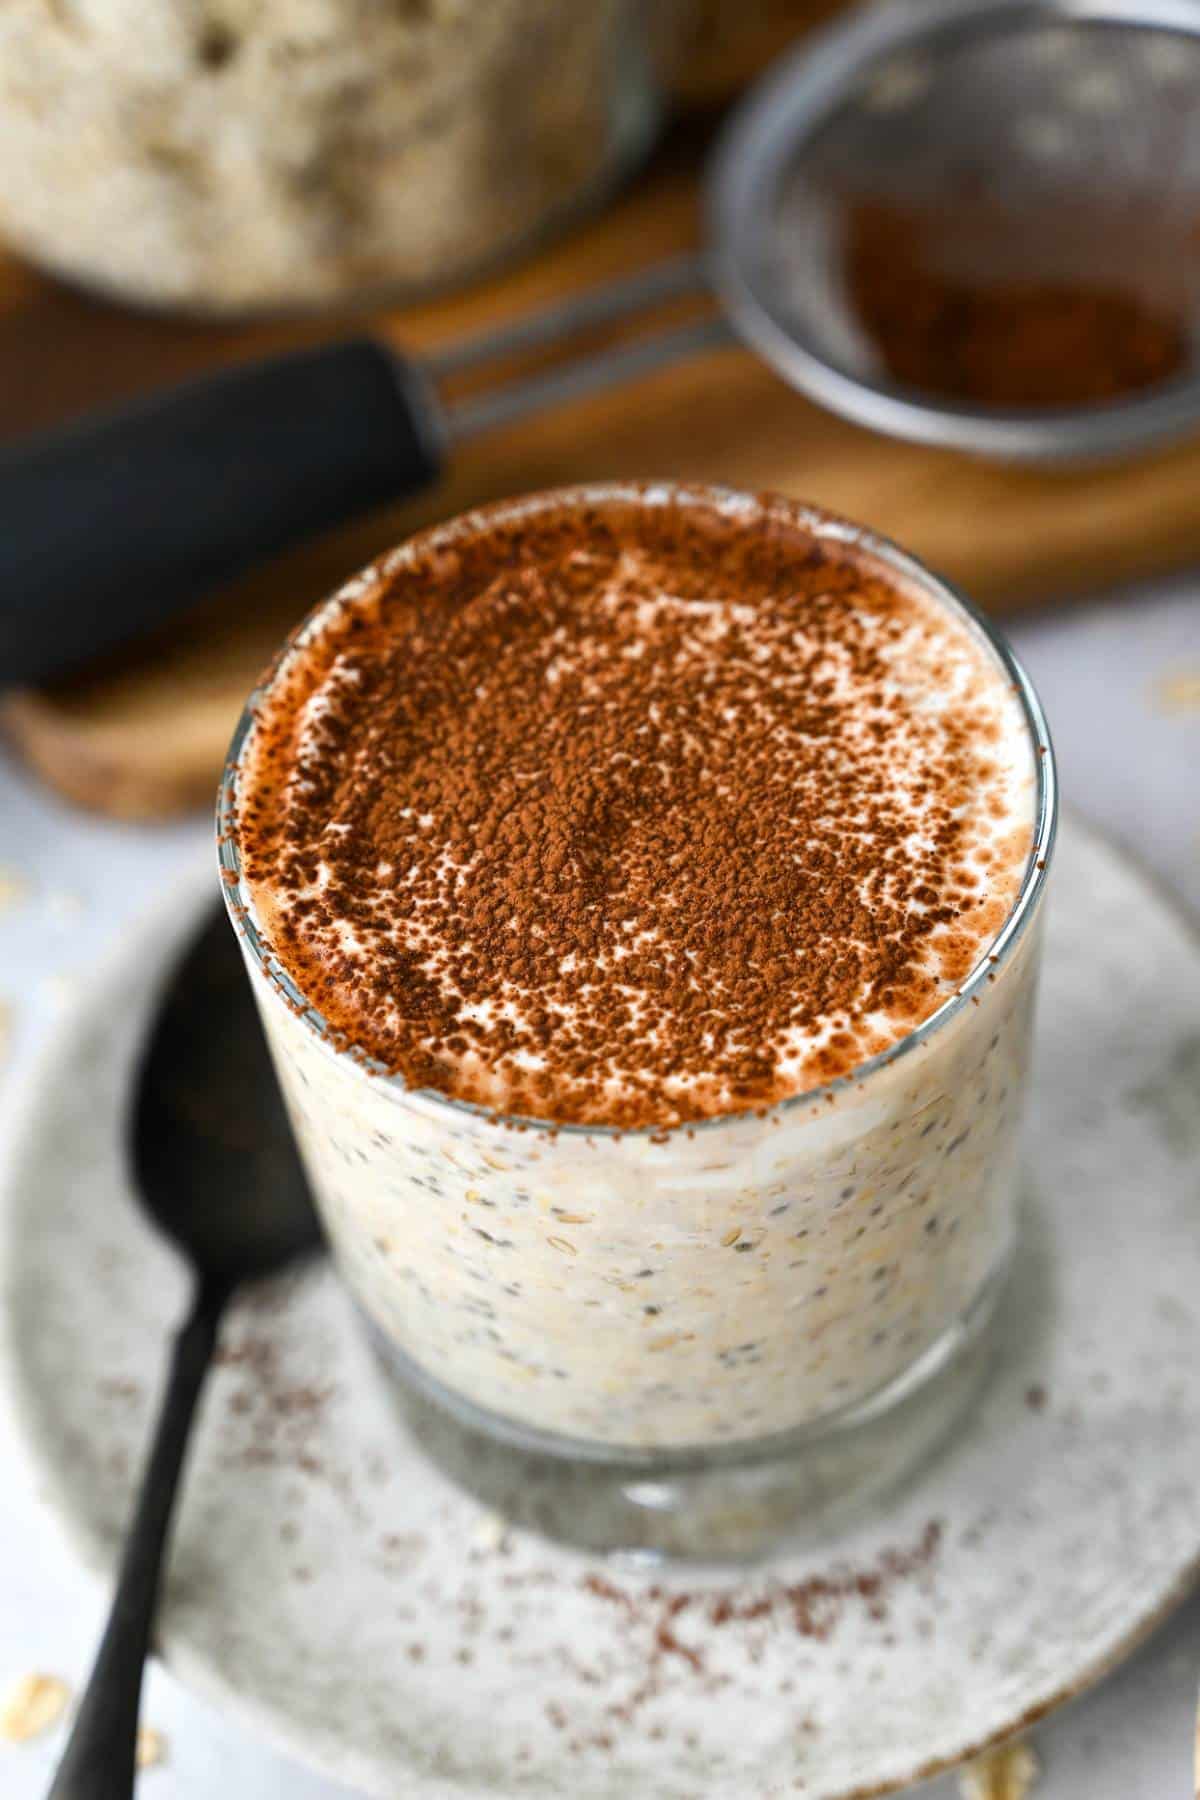 overnight oats in a glass on a plate with a jar of oats and cocoa powder in a strainer behind it